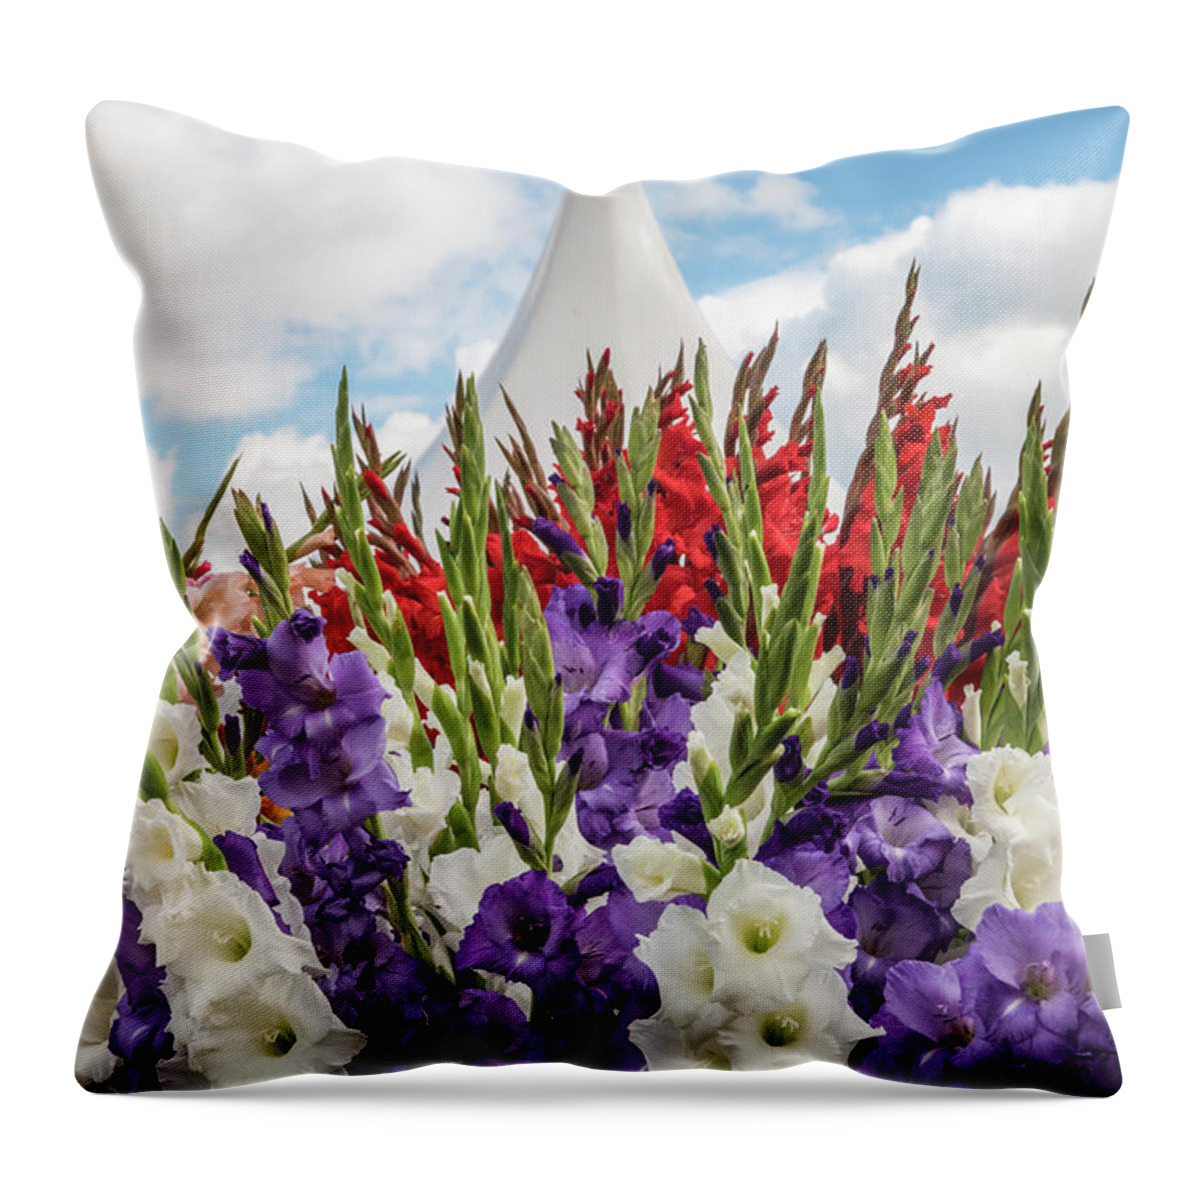 Vertical Throw Pillow featuring the photograph Gladioli Mount Everest by Catherine Sullivan